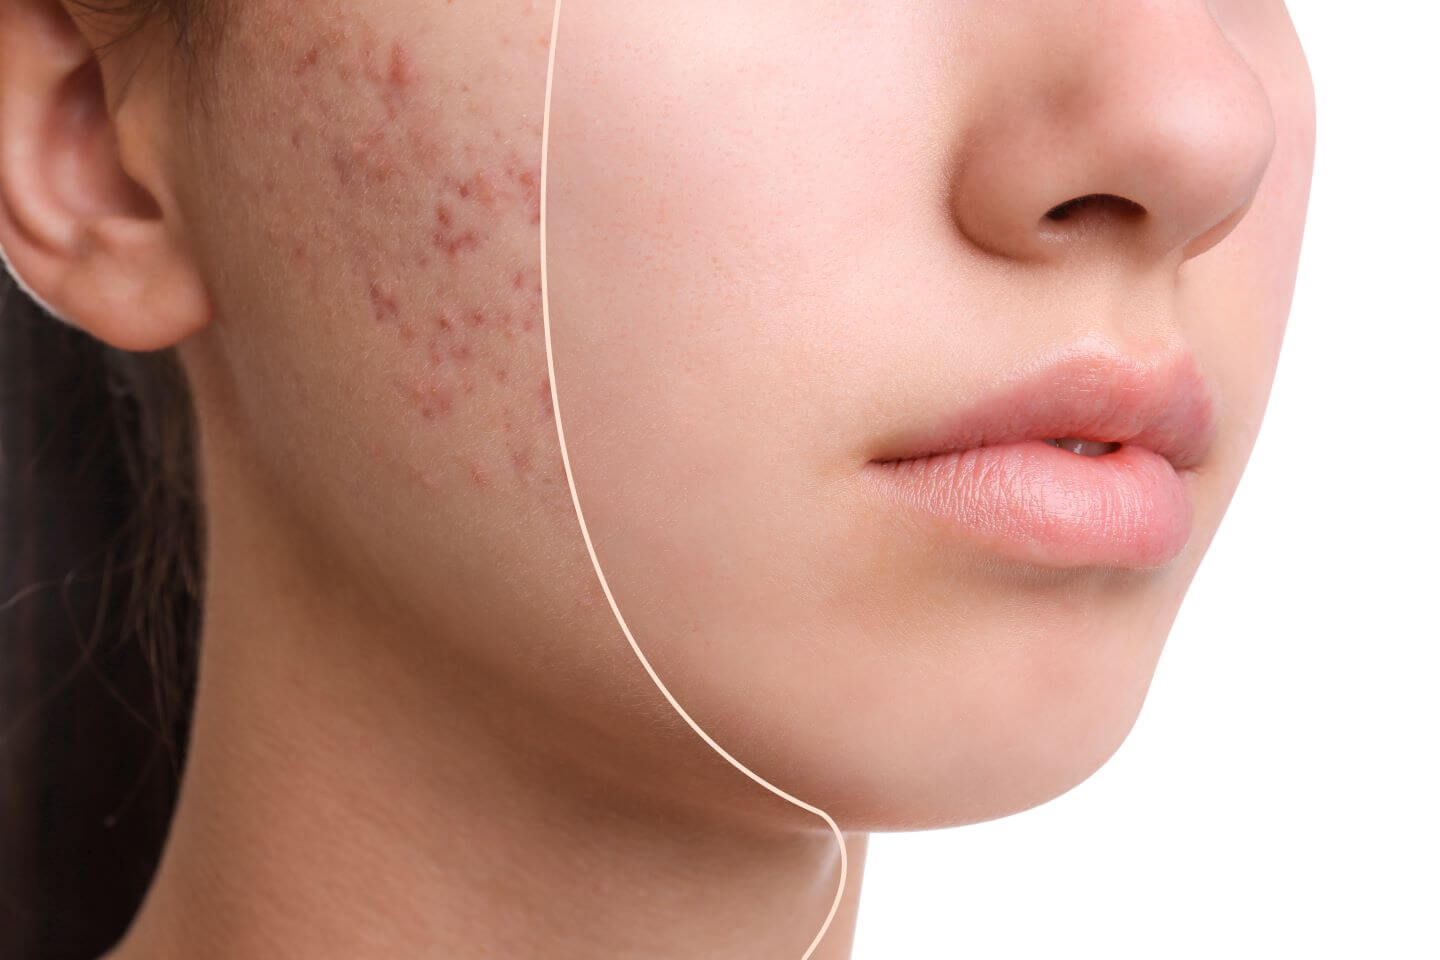 young woman who has used Accutane alternatives for treatment of acne